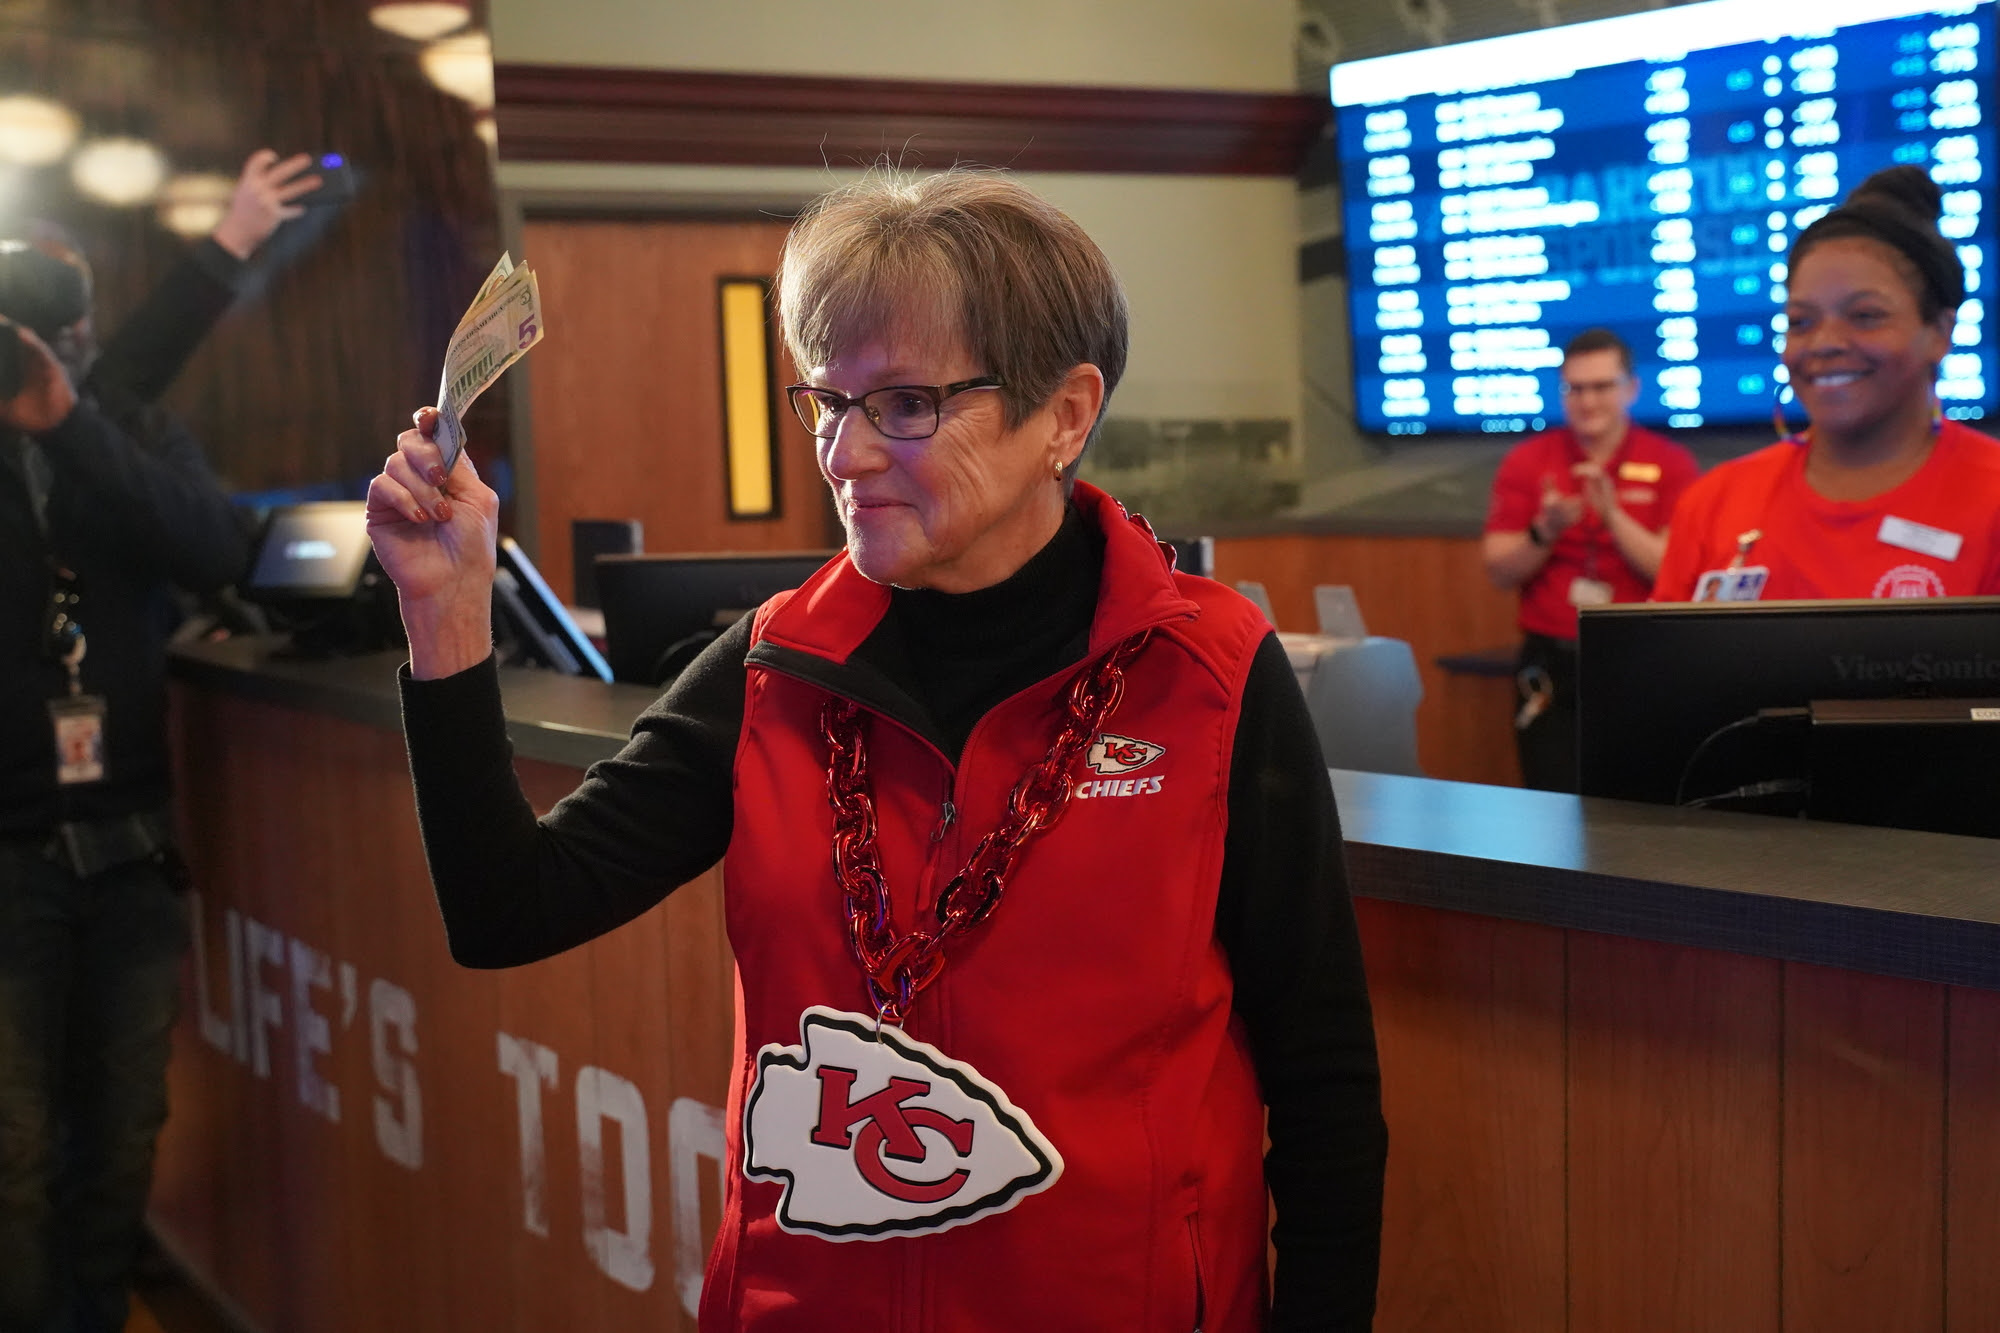 Governor Laura Kelly wearing Chiefs jersey